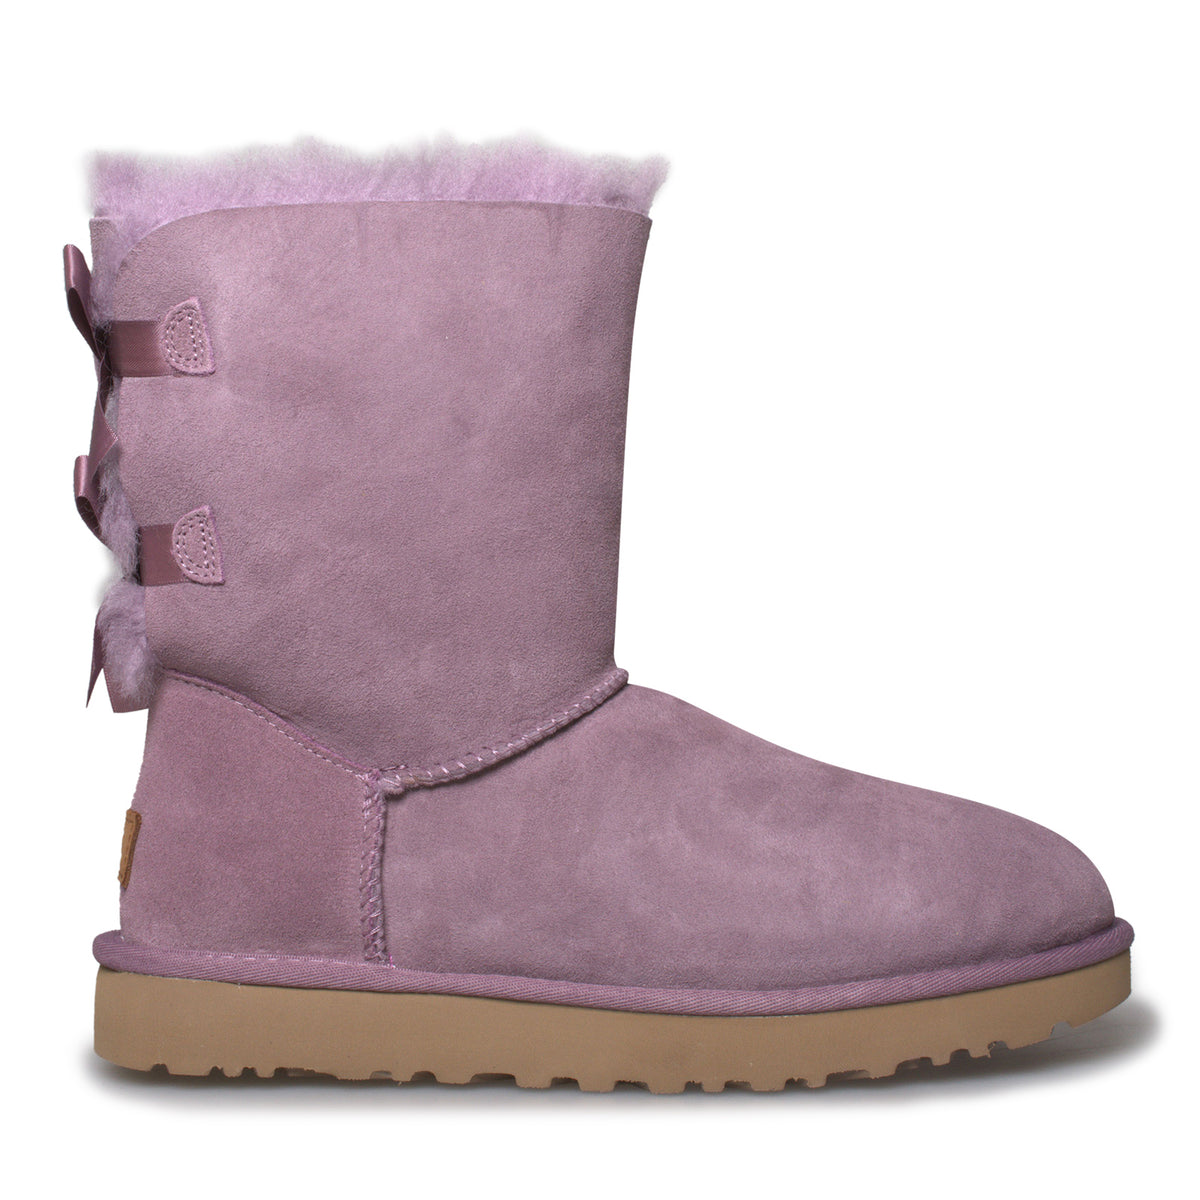 light purple uggs with bows